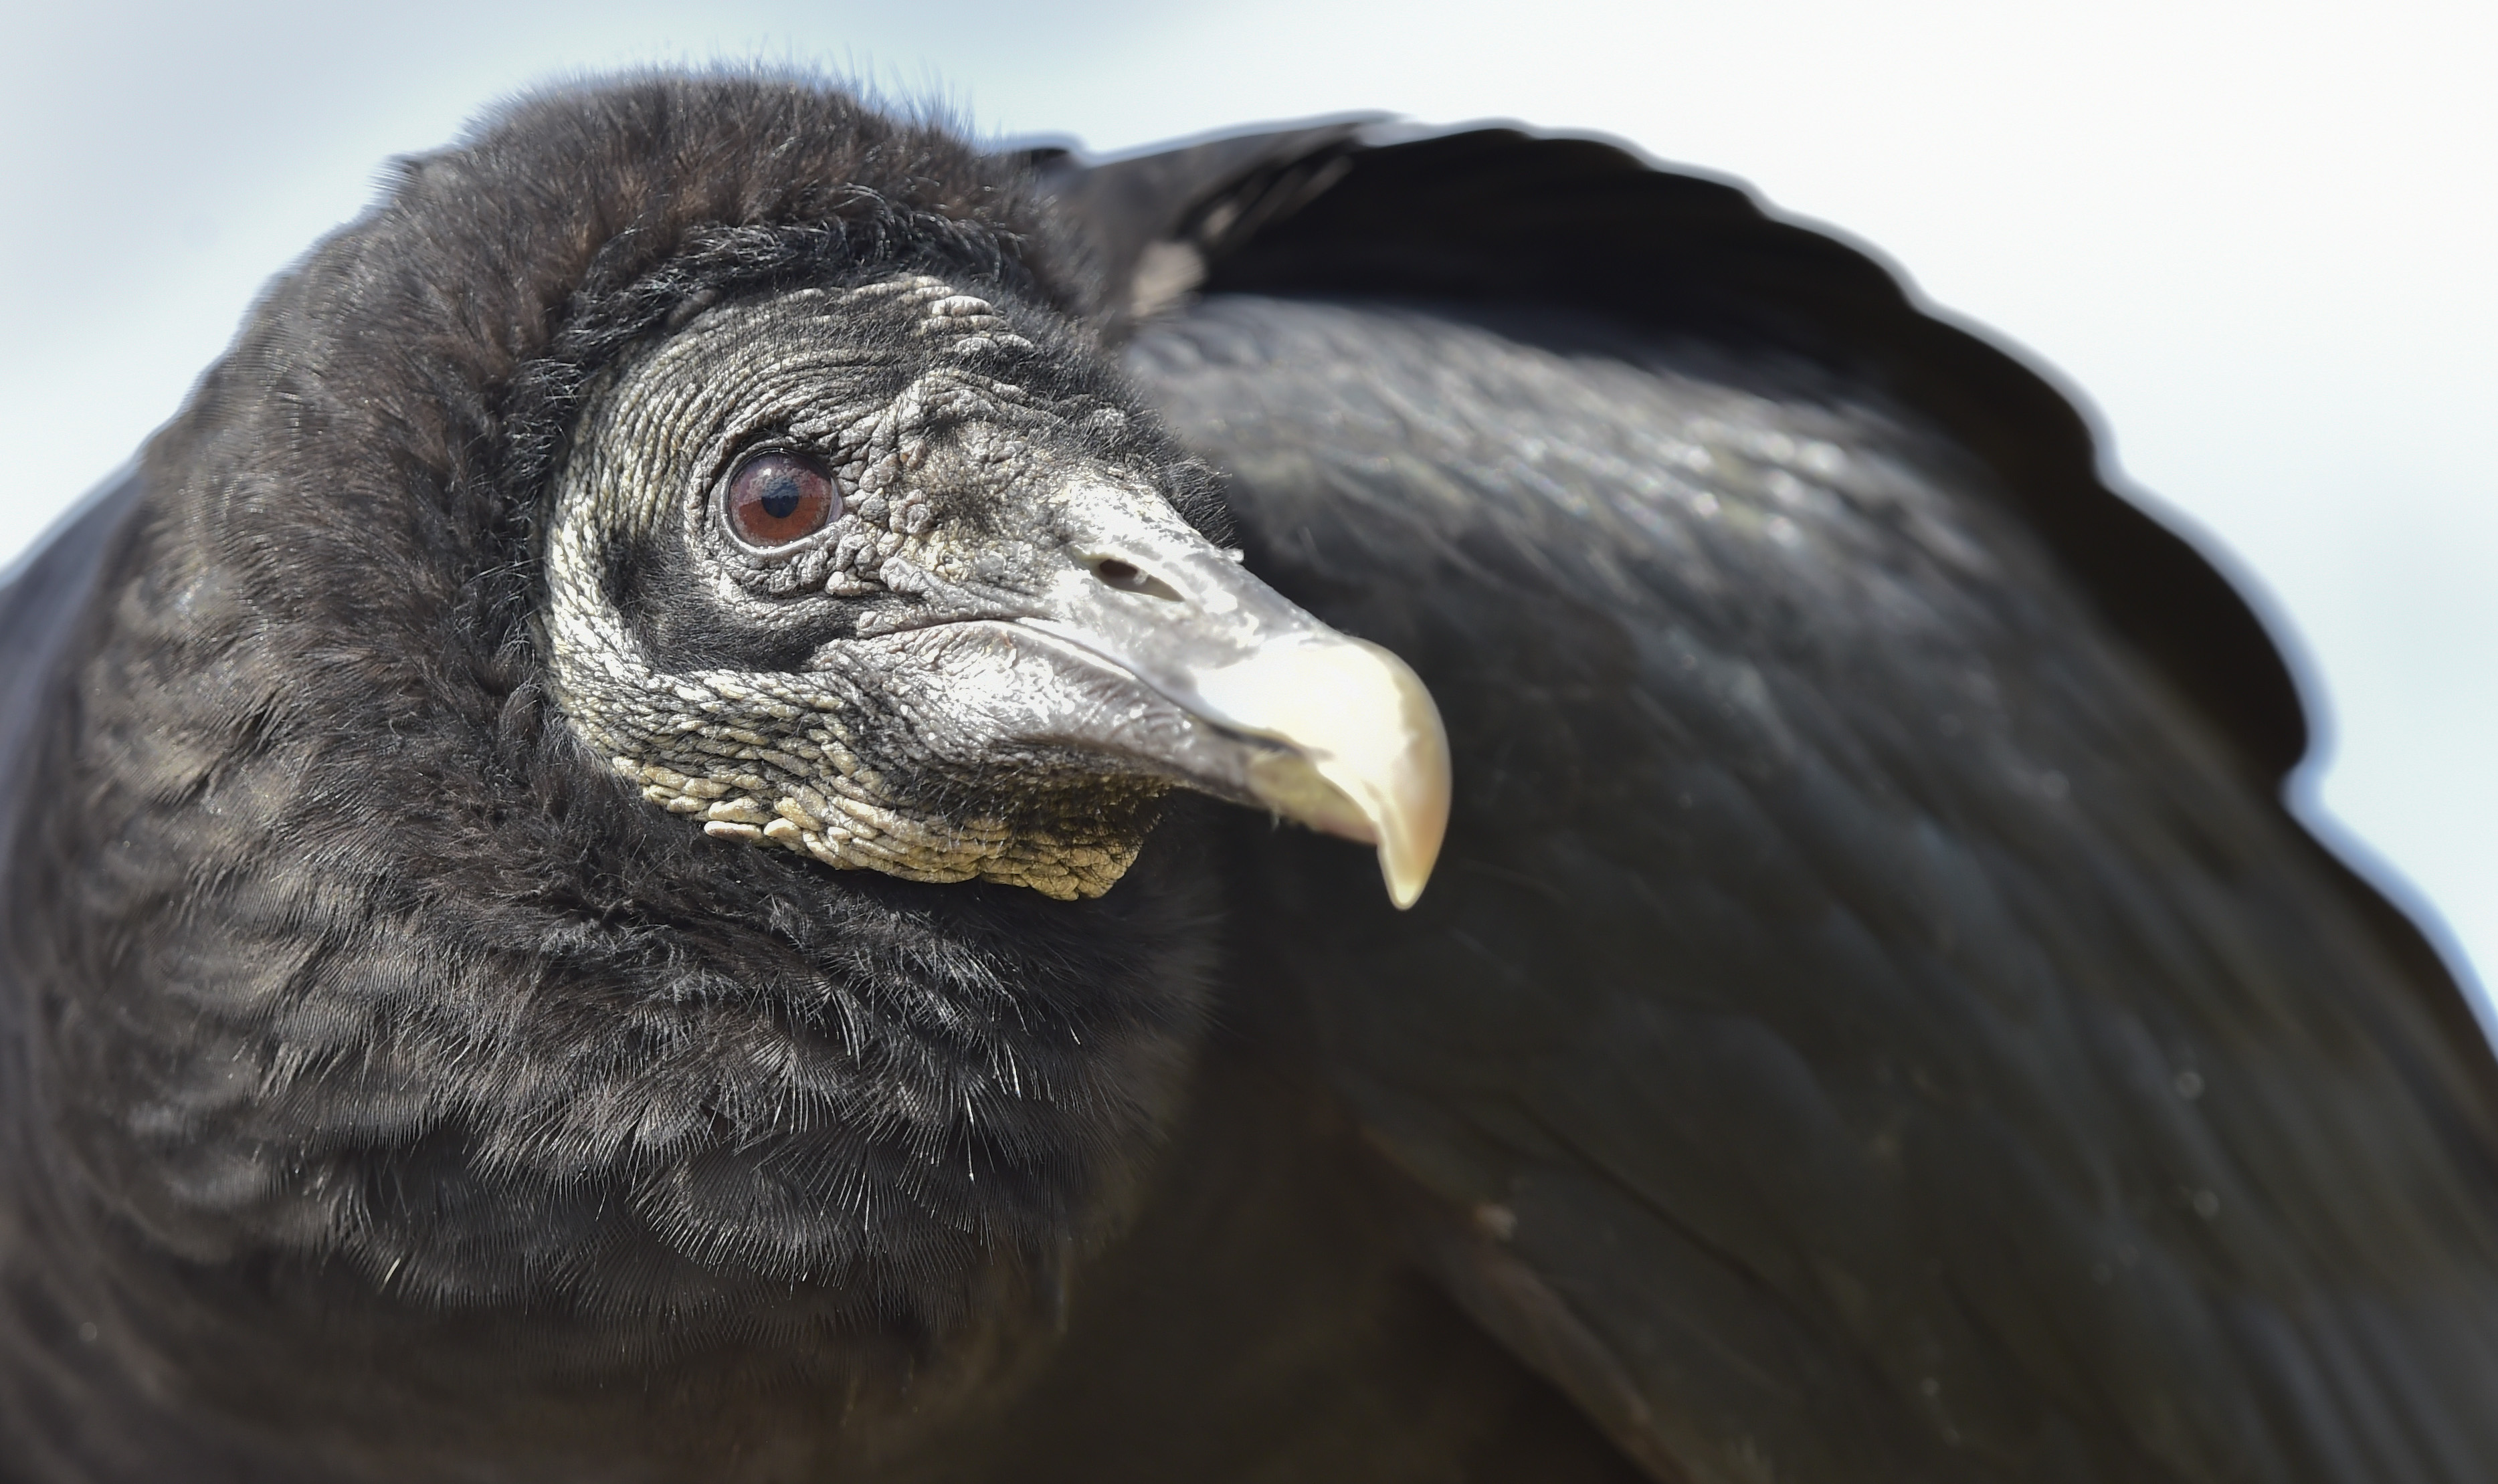 Vultures fall migration to Florida, known for puking for protection